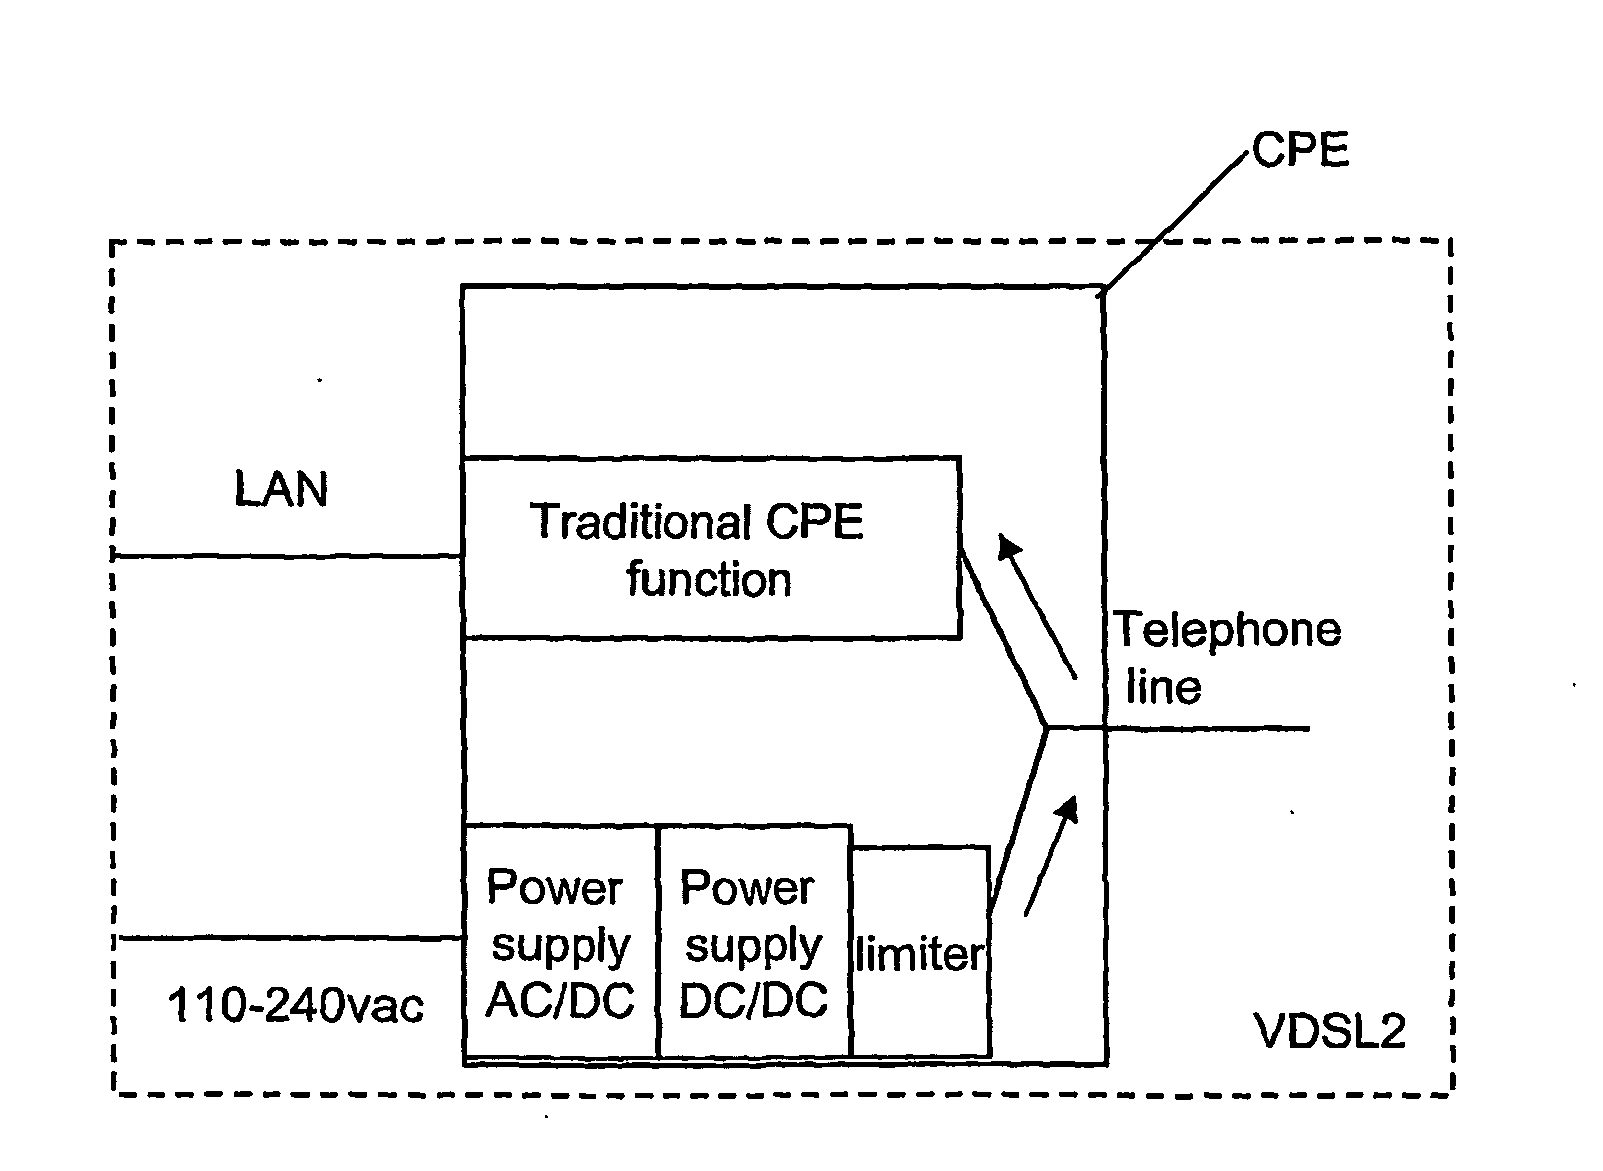 Method and apparatus for providing electrical power to a broadband digital subscriber line access